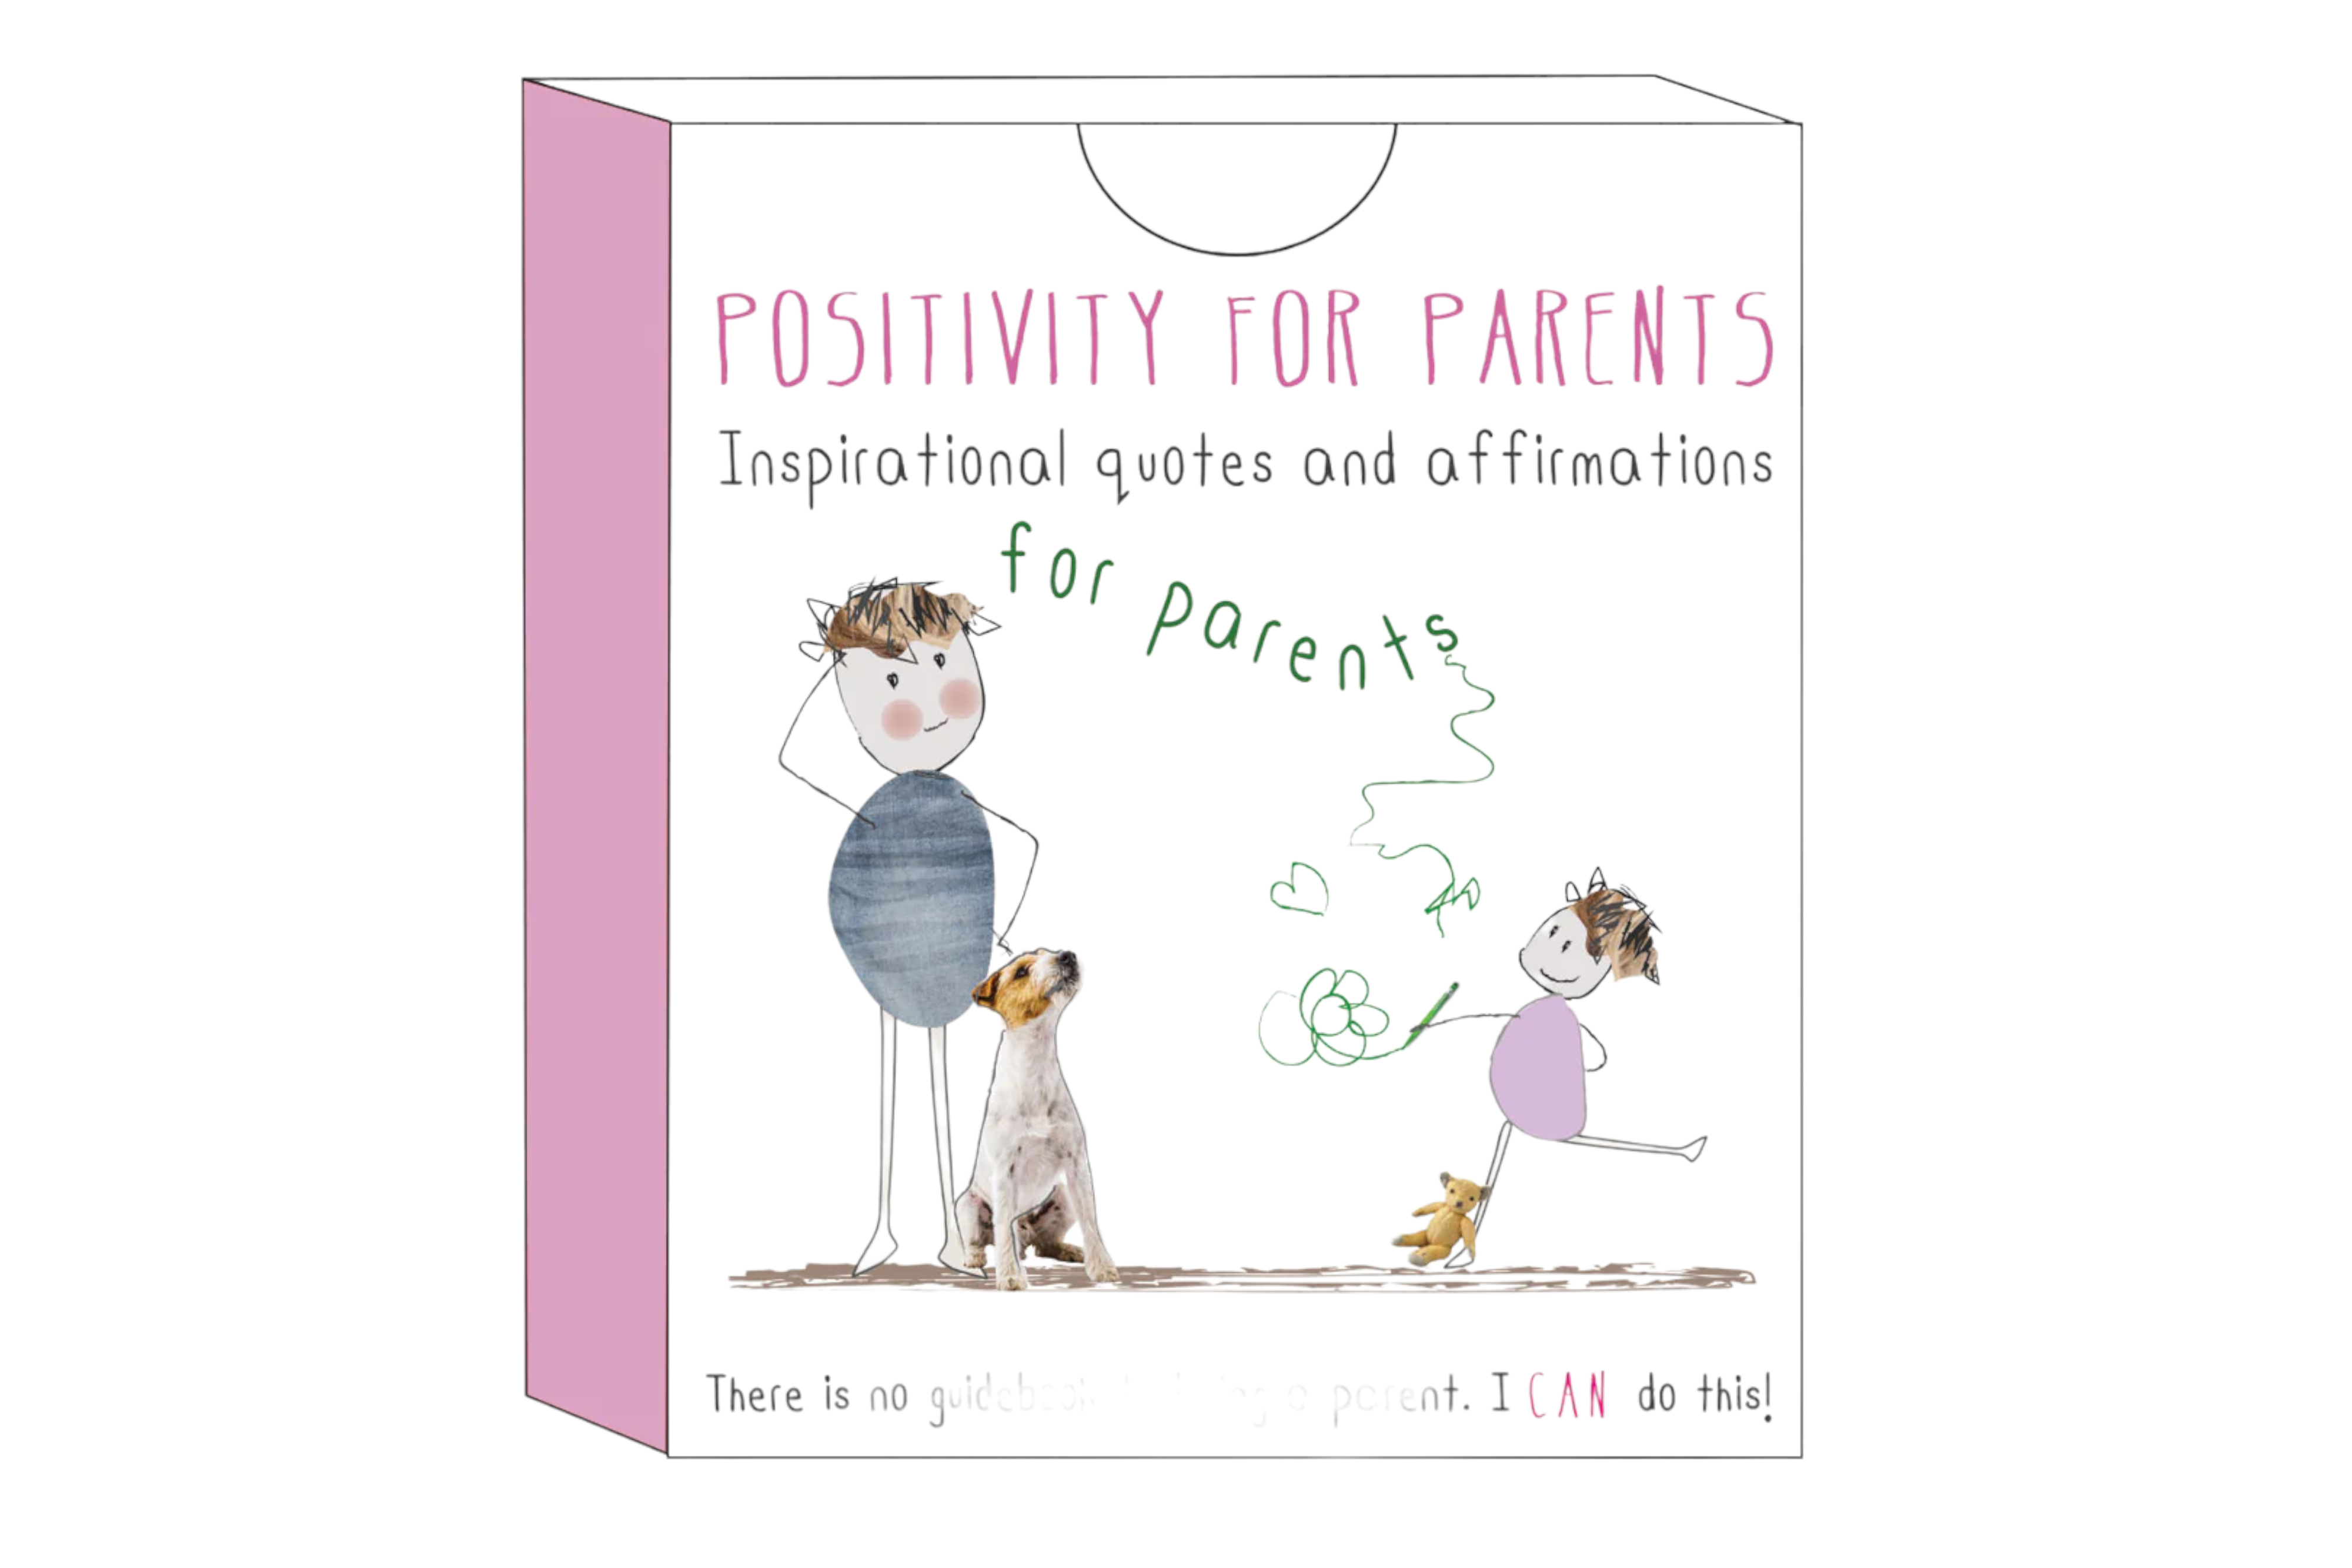 A book titled "Positivity for Parents - Positivity Pack," featuring whimsical illustrations of a parent with a baby, a playful dog, and a little girl drawing on a wall, with an uplifting message at the bottom by icandy.